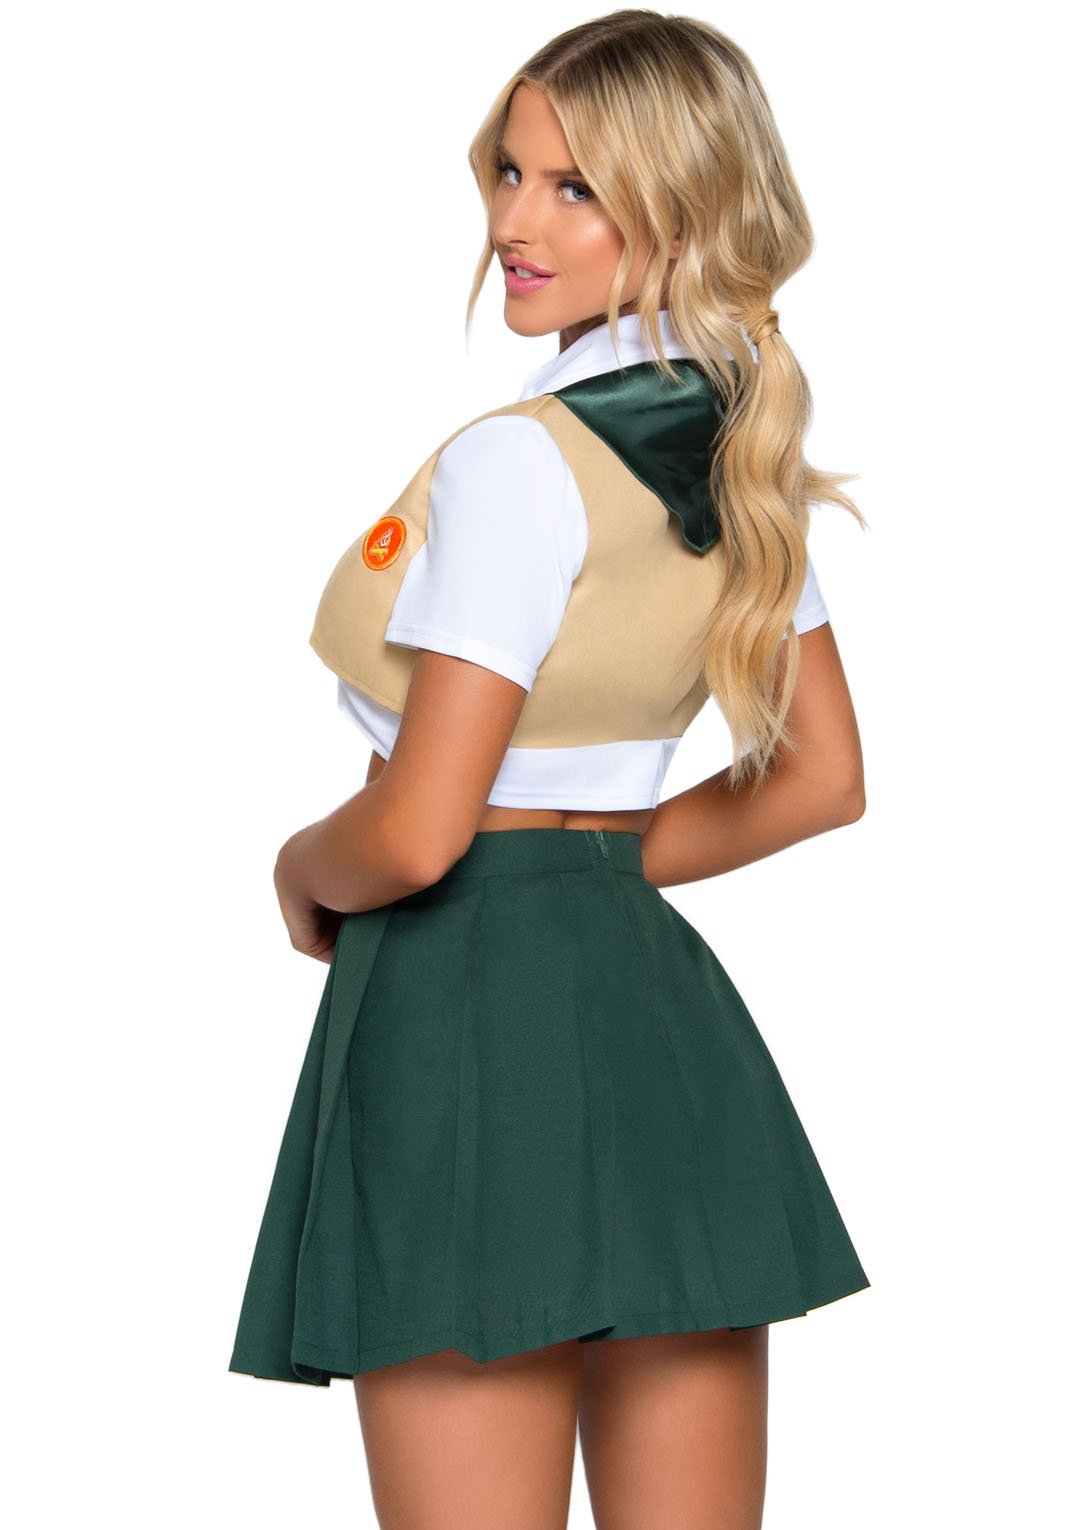 Sexy Scout Collared Cropped Top with Vest with Pleated Skirt and Neckerchief